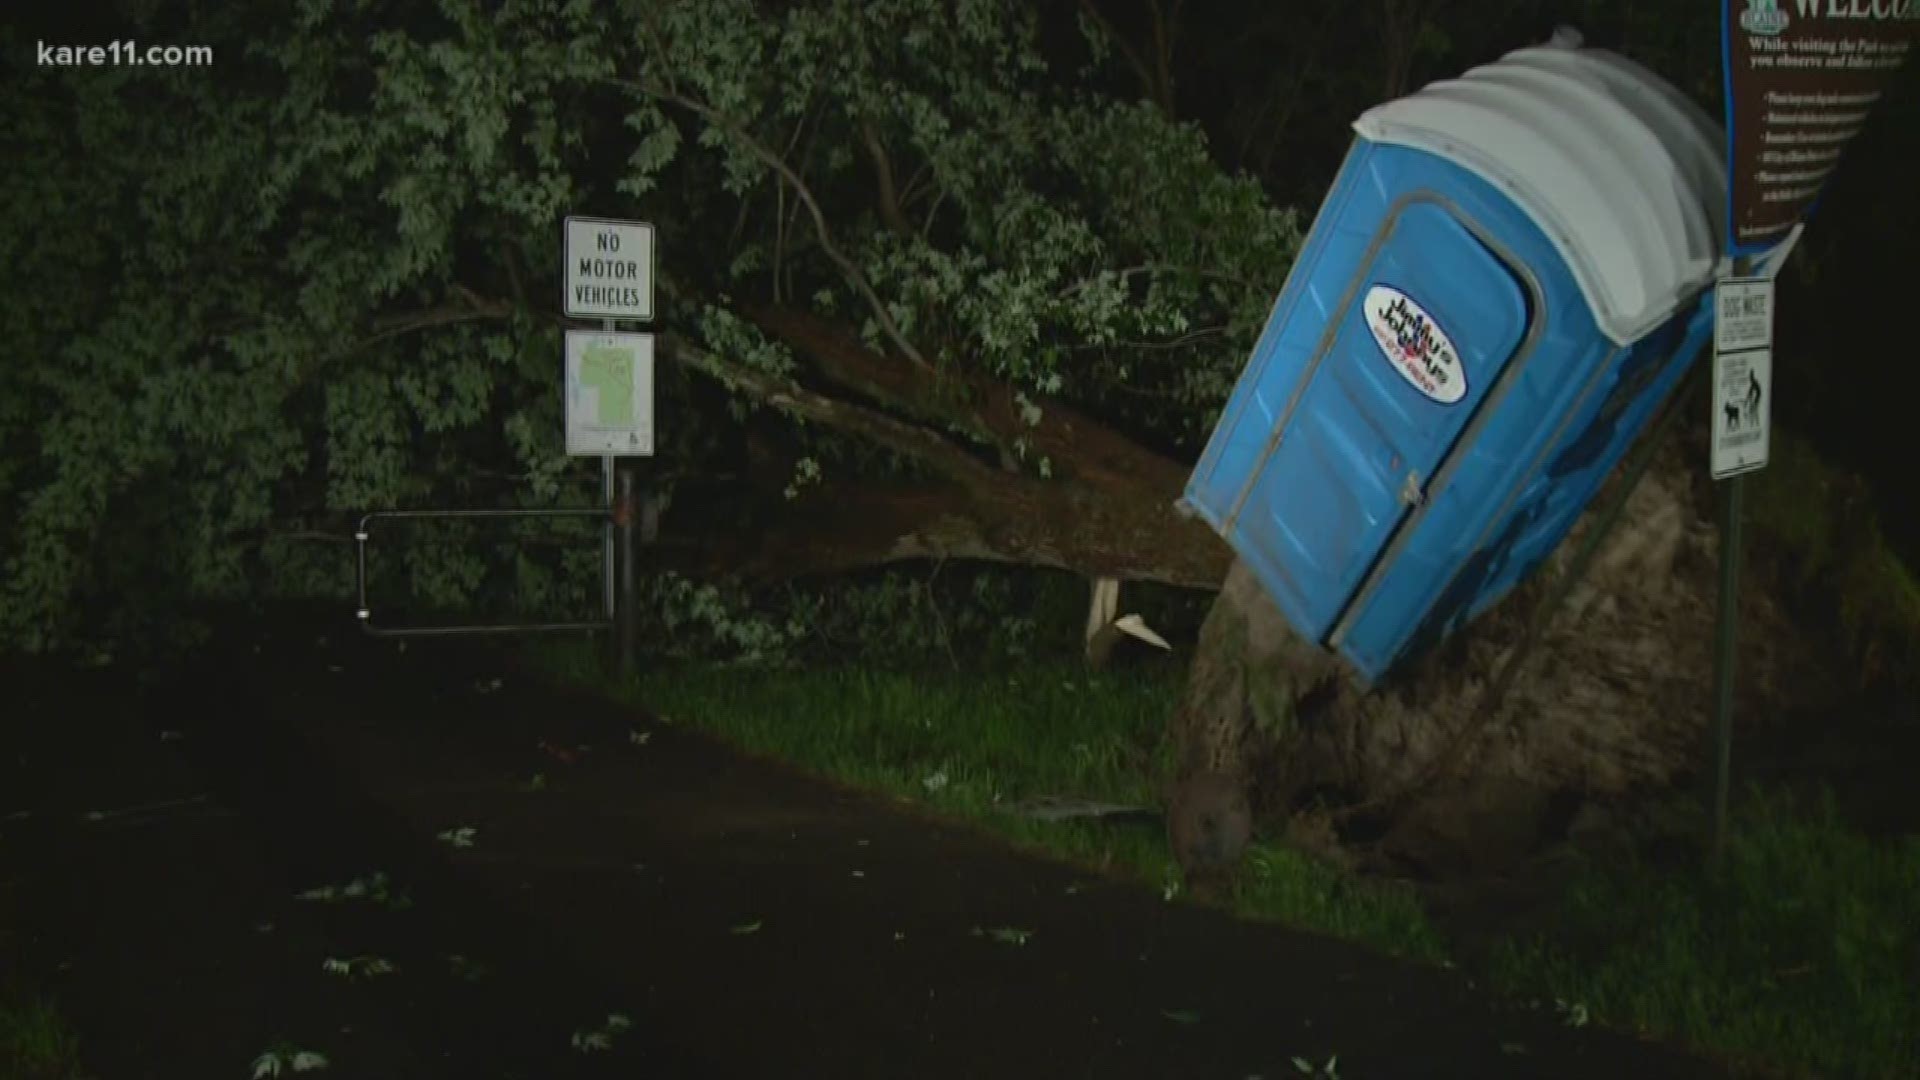 Monday night storms brought 60 mph wind gusts, bringing down several trees and power lines, and reports of golf ball-sized hail. https://kare11.tv/2L5Aa9Y